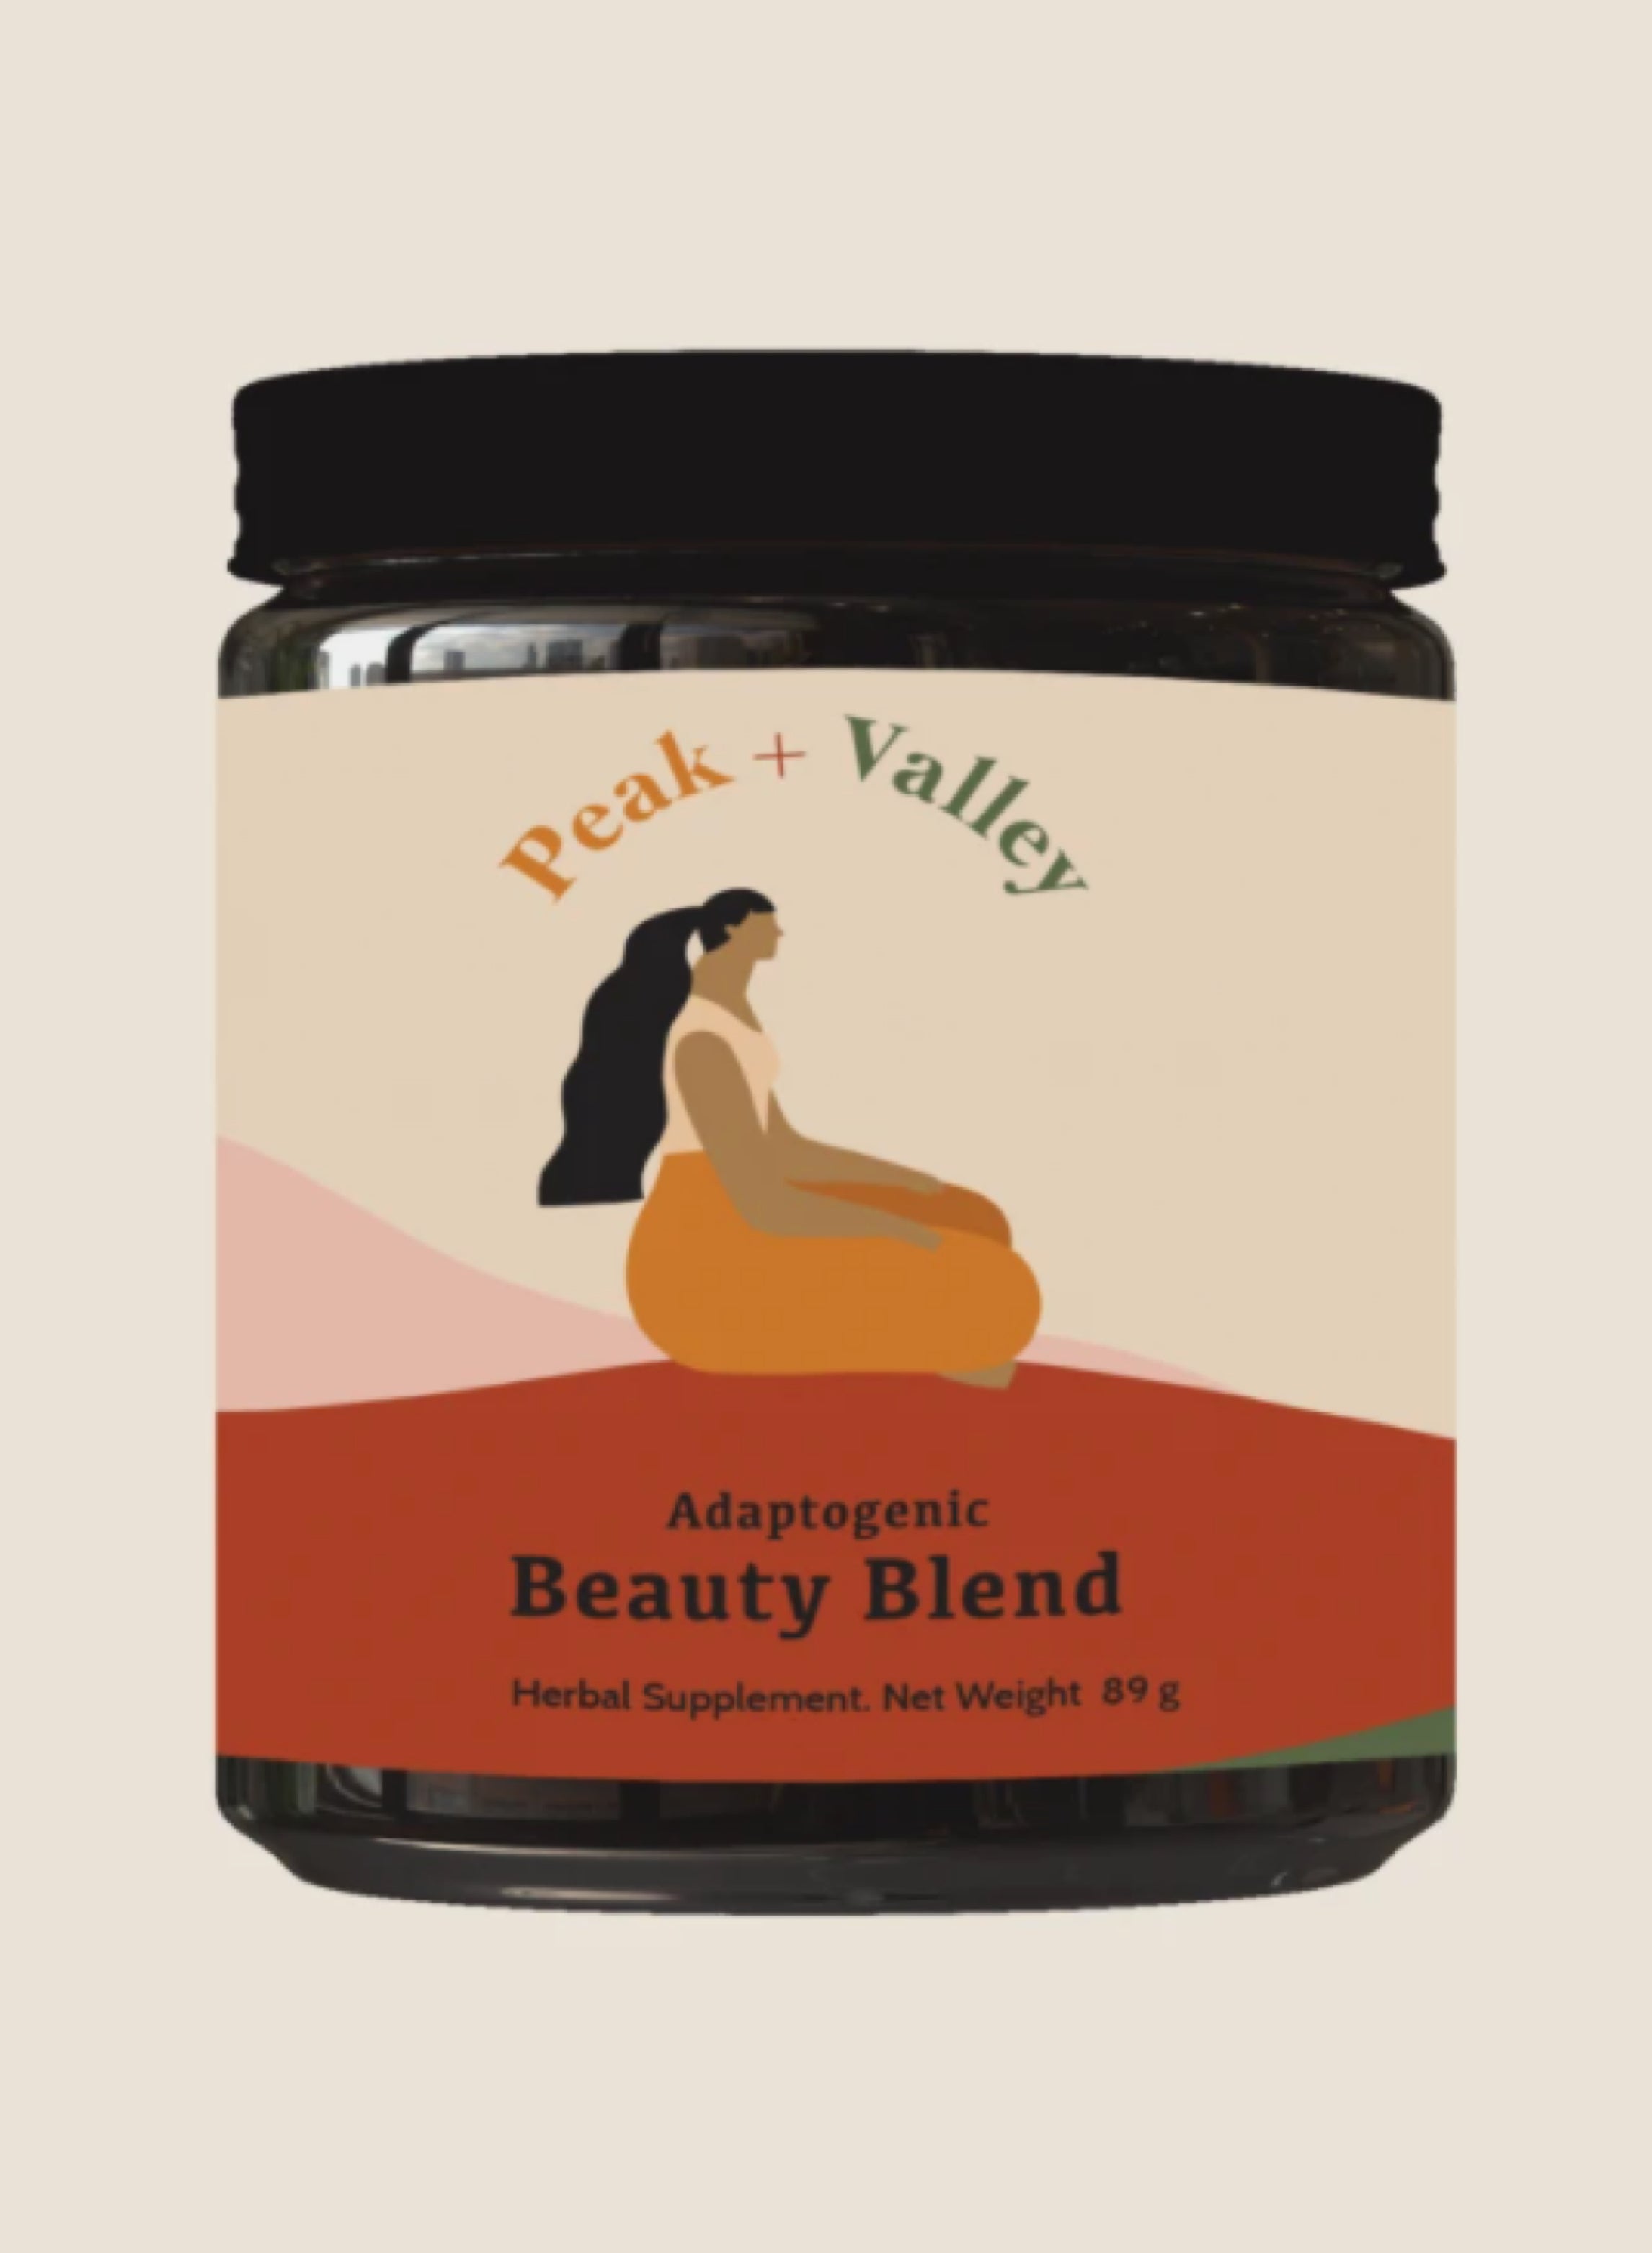 Peak and Valley Beauty Blend